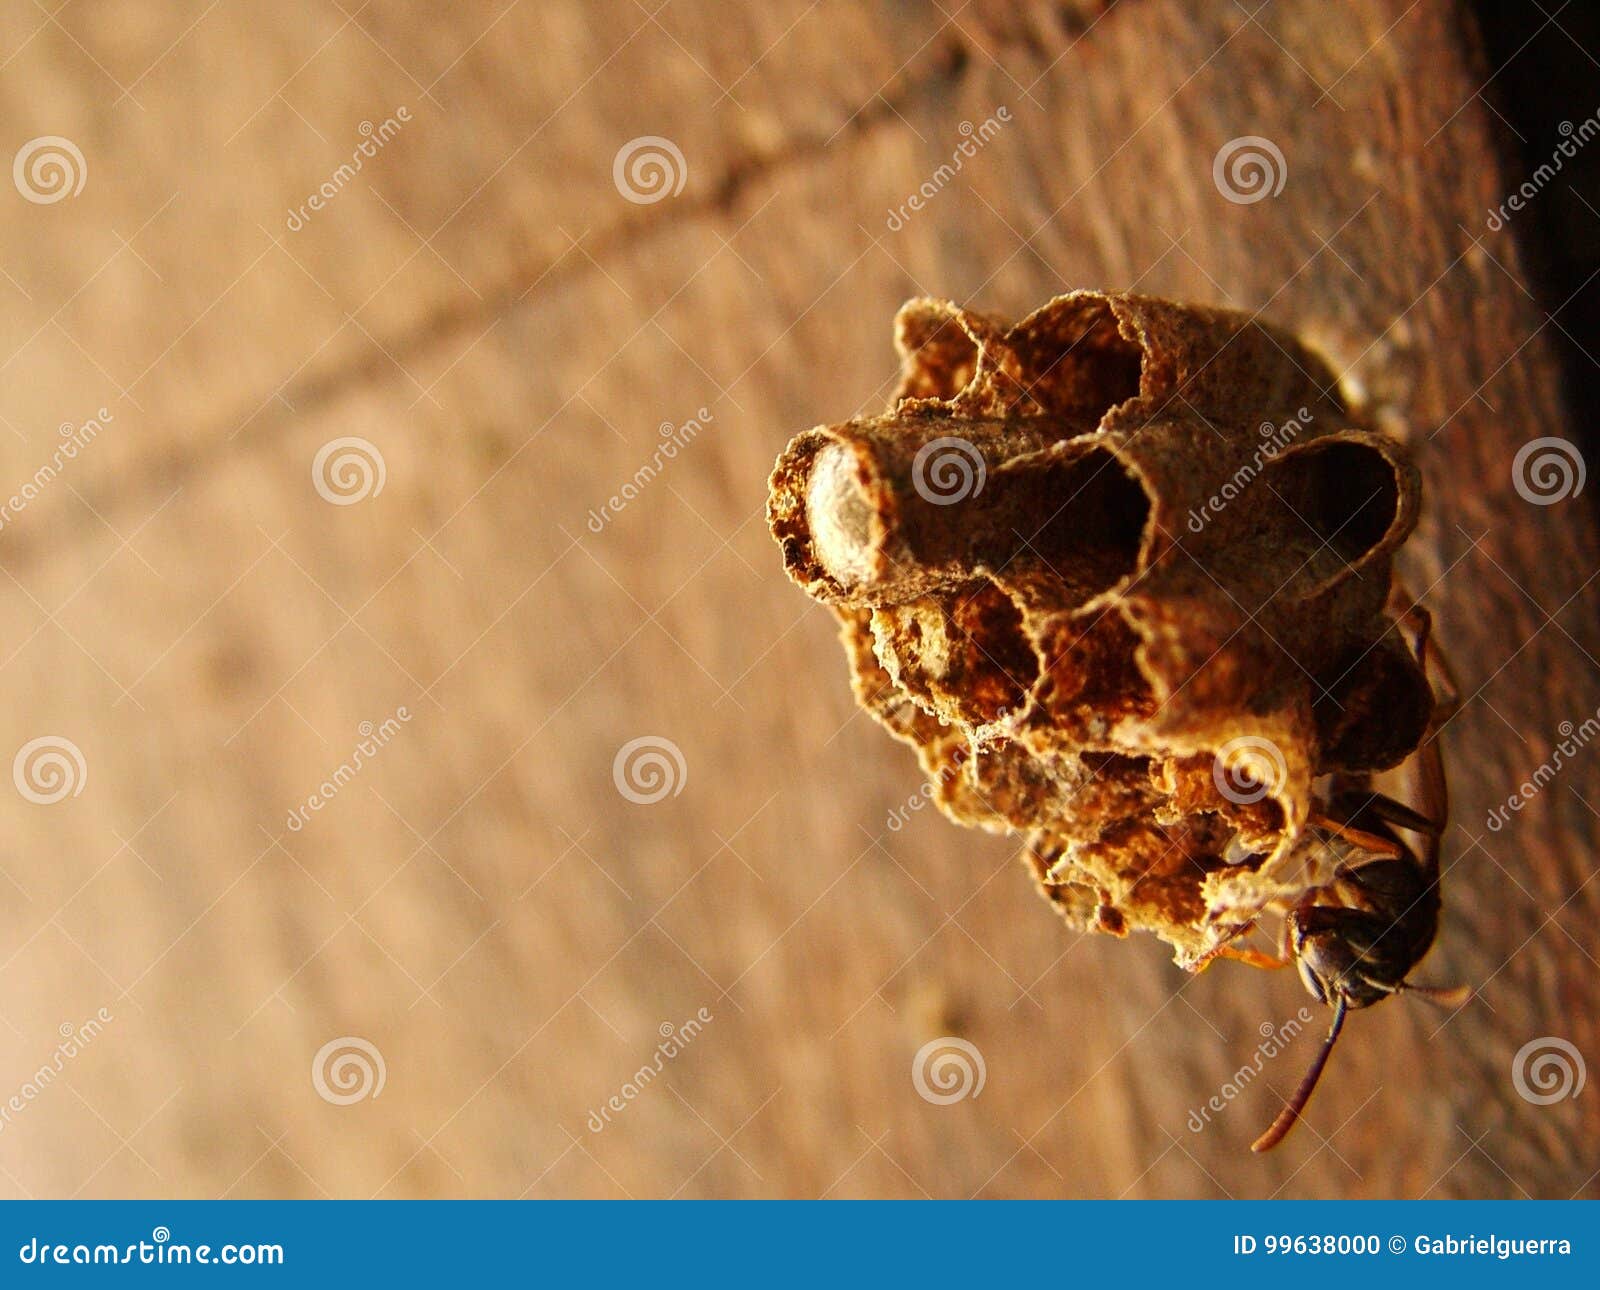 wasp working on his nest